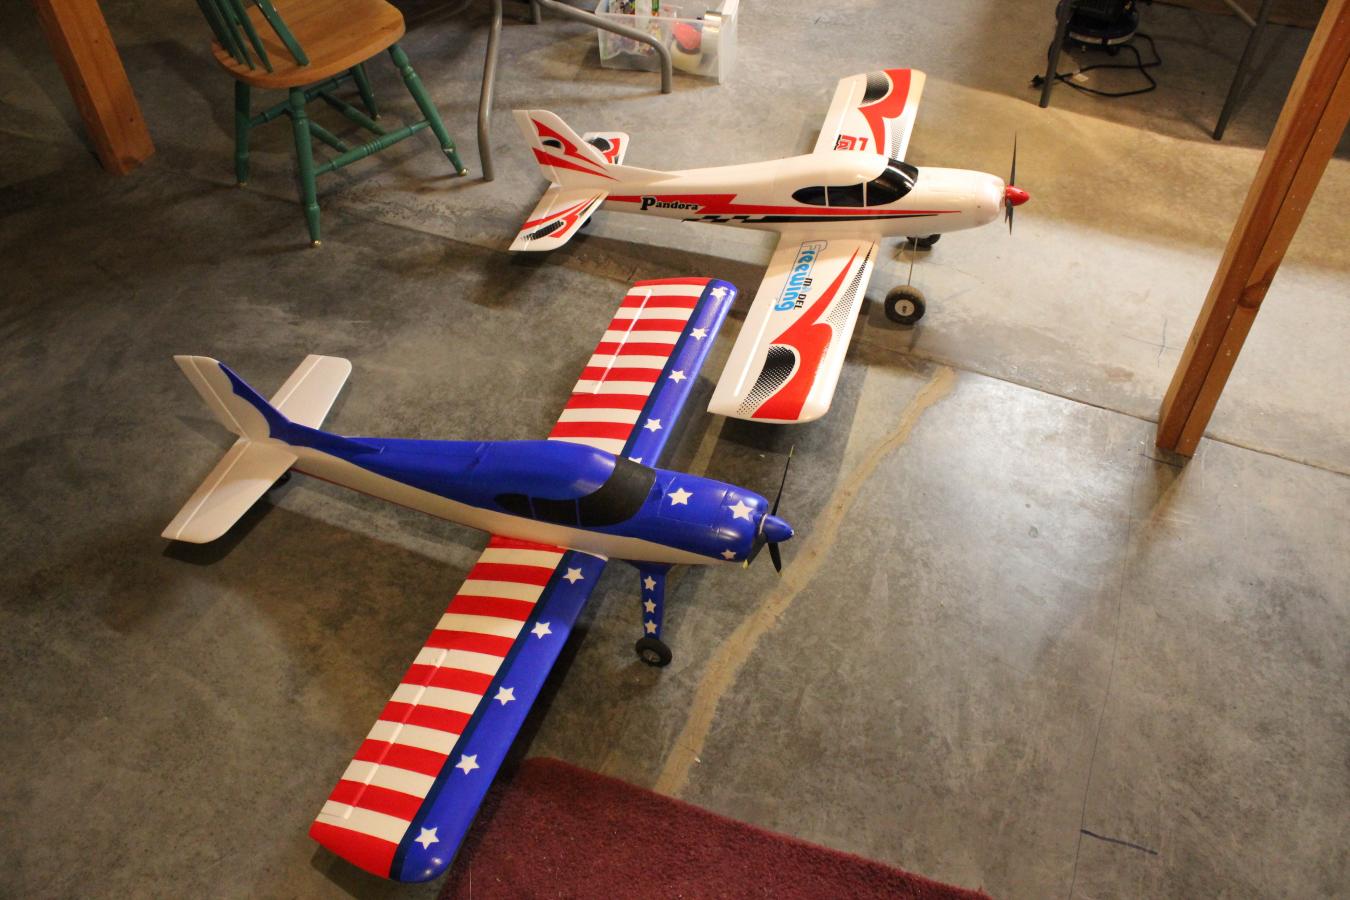 House Paint for foam Hobby Squawk RC Airplane and